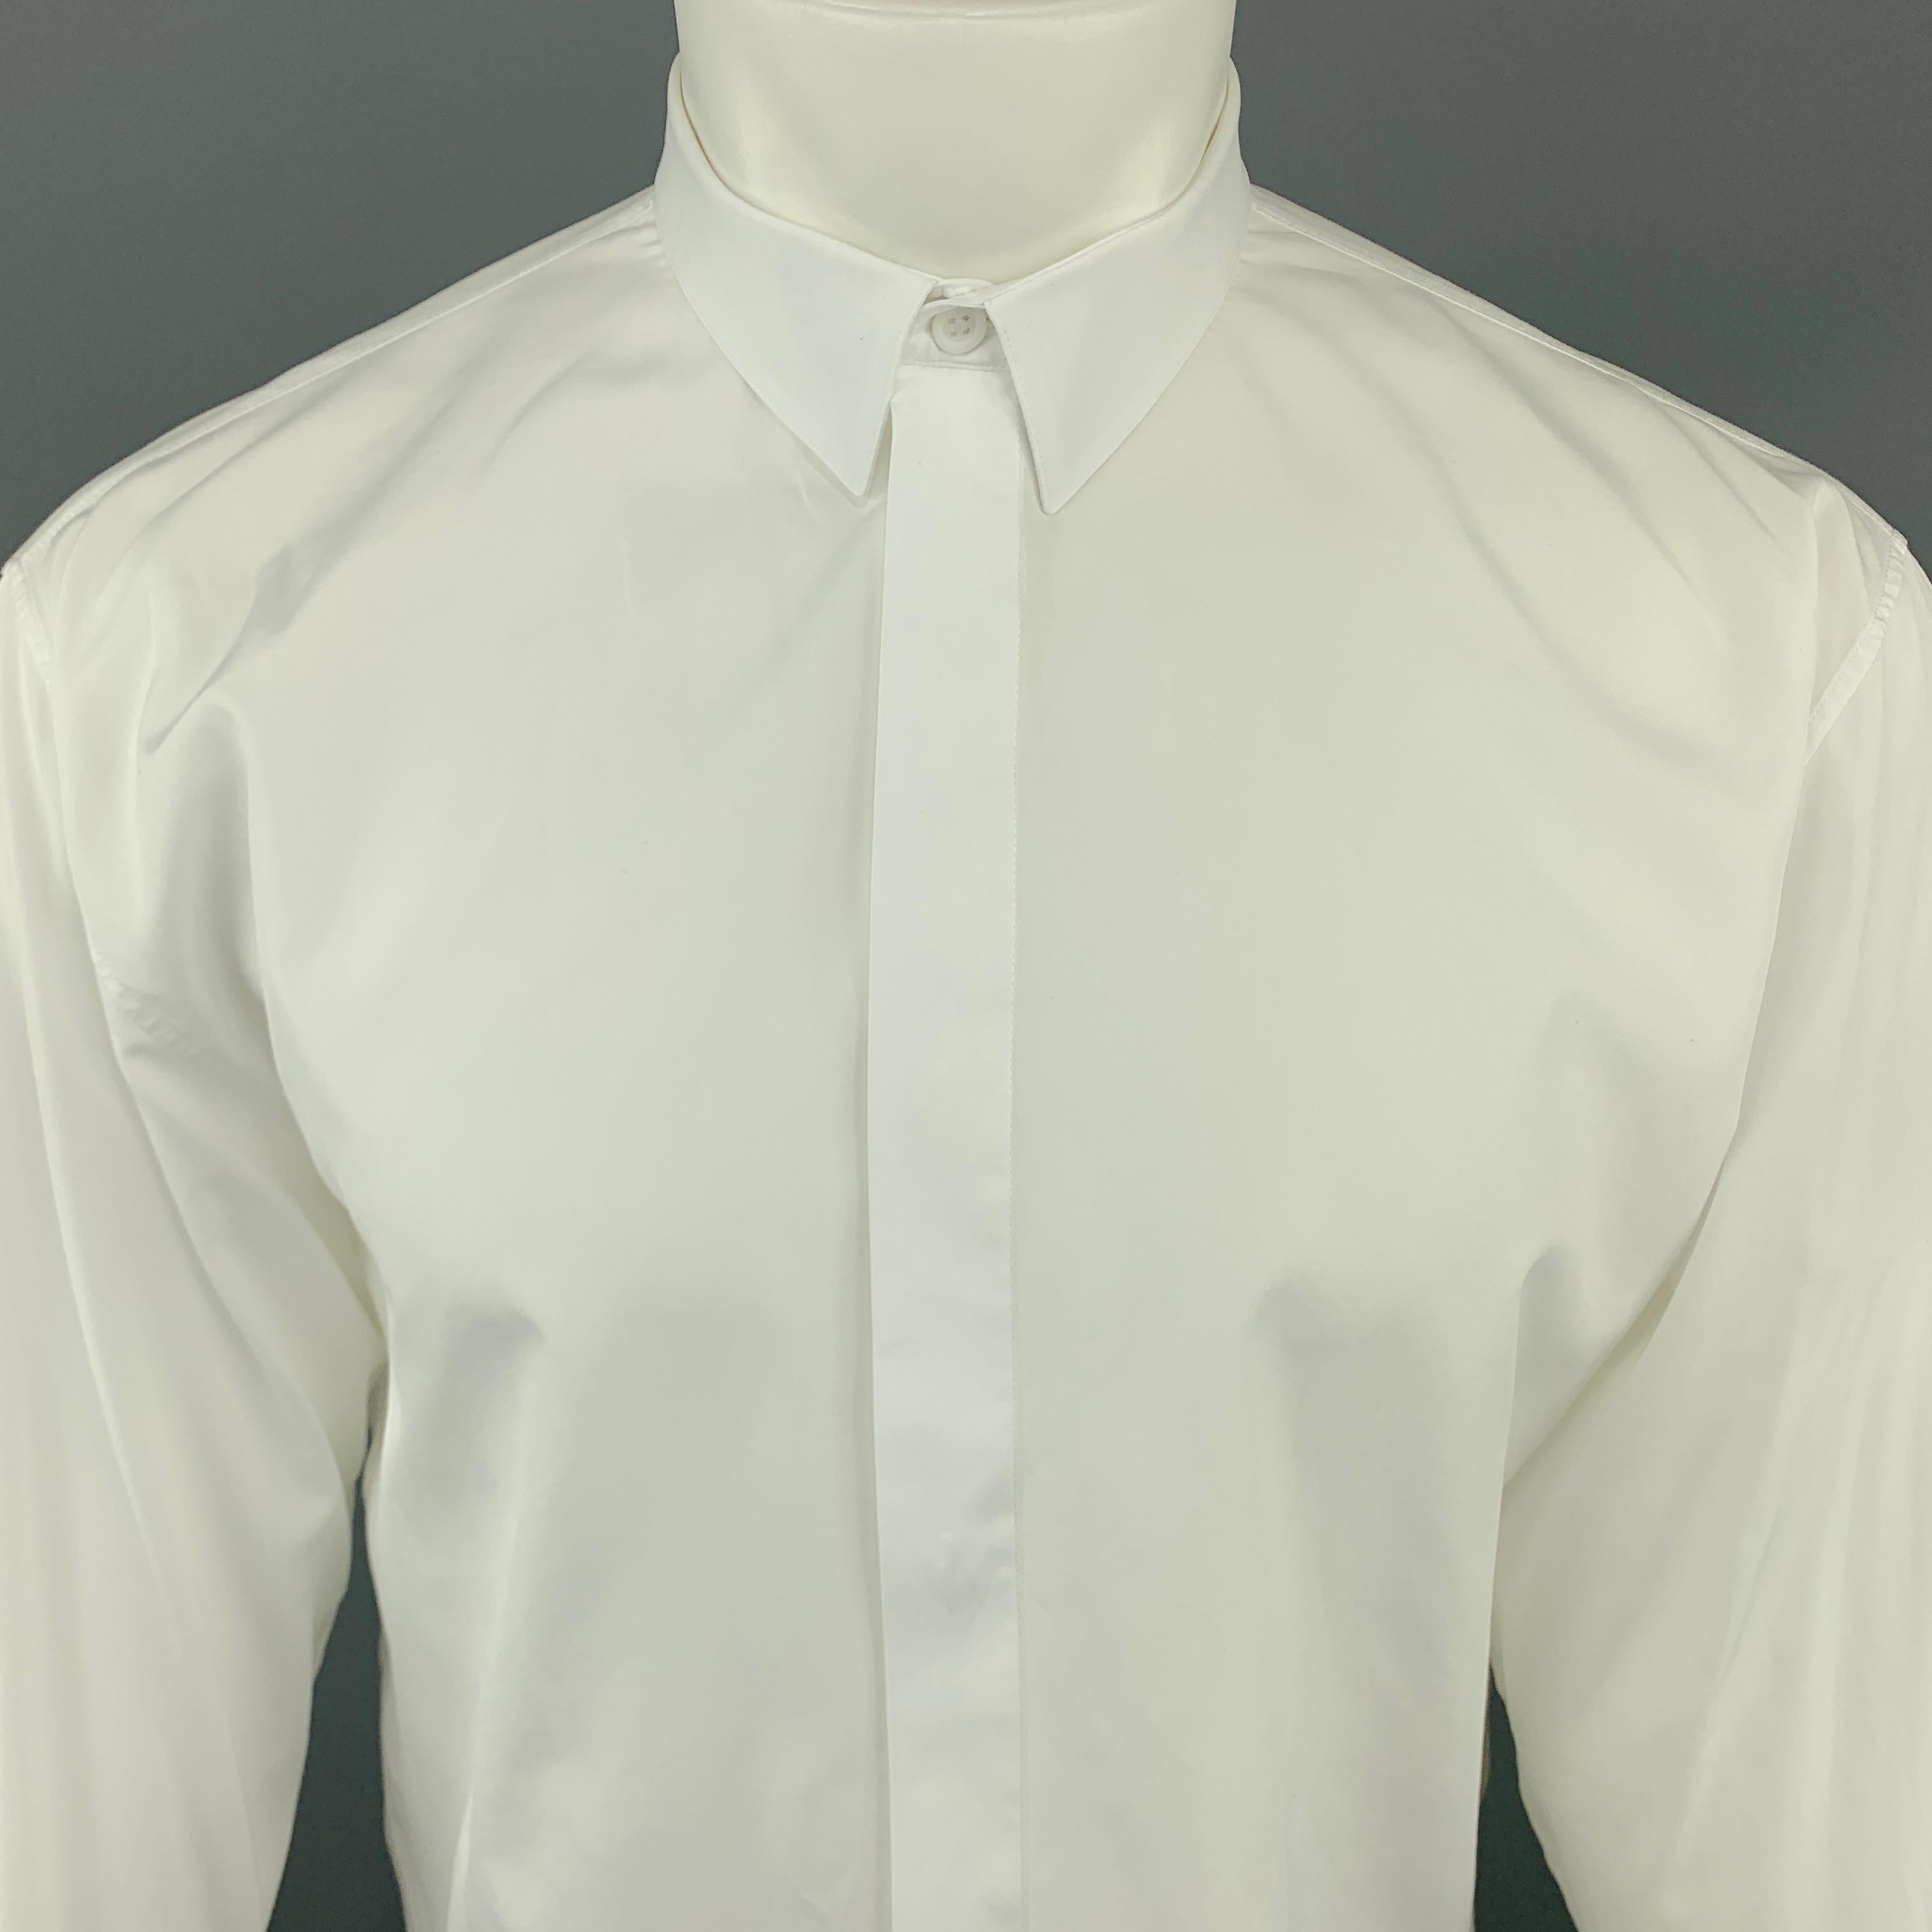 DIOR HOMME Long Sleeve Shirt comes in a white tone in a solid cotton material, with hidden buttons at closure, buttoned cuffs, button up, and a bee embroidered at front. Made in Italy.

Excellent Pre-Owned Condition.
Marked: